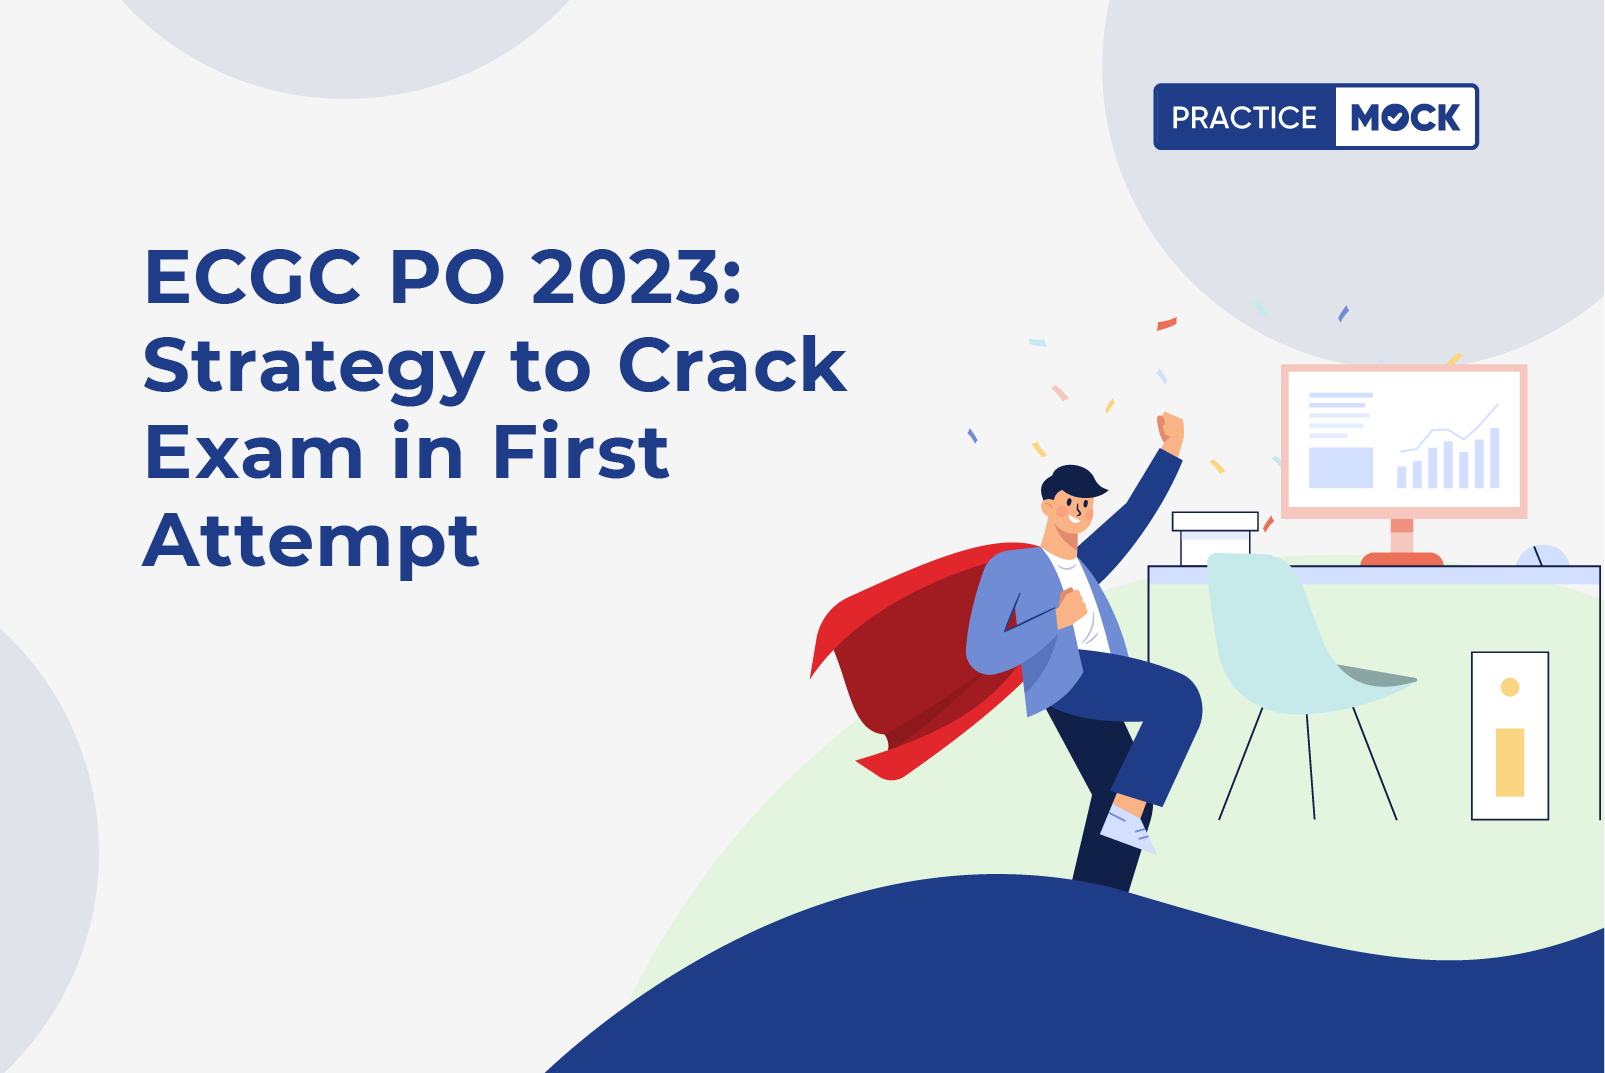 ECGC PO 2023 Strategy to Crack Exam in First Attempt